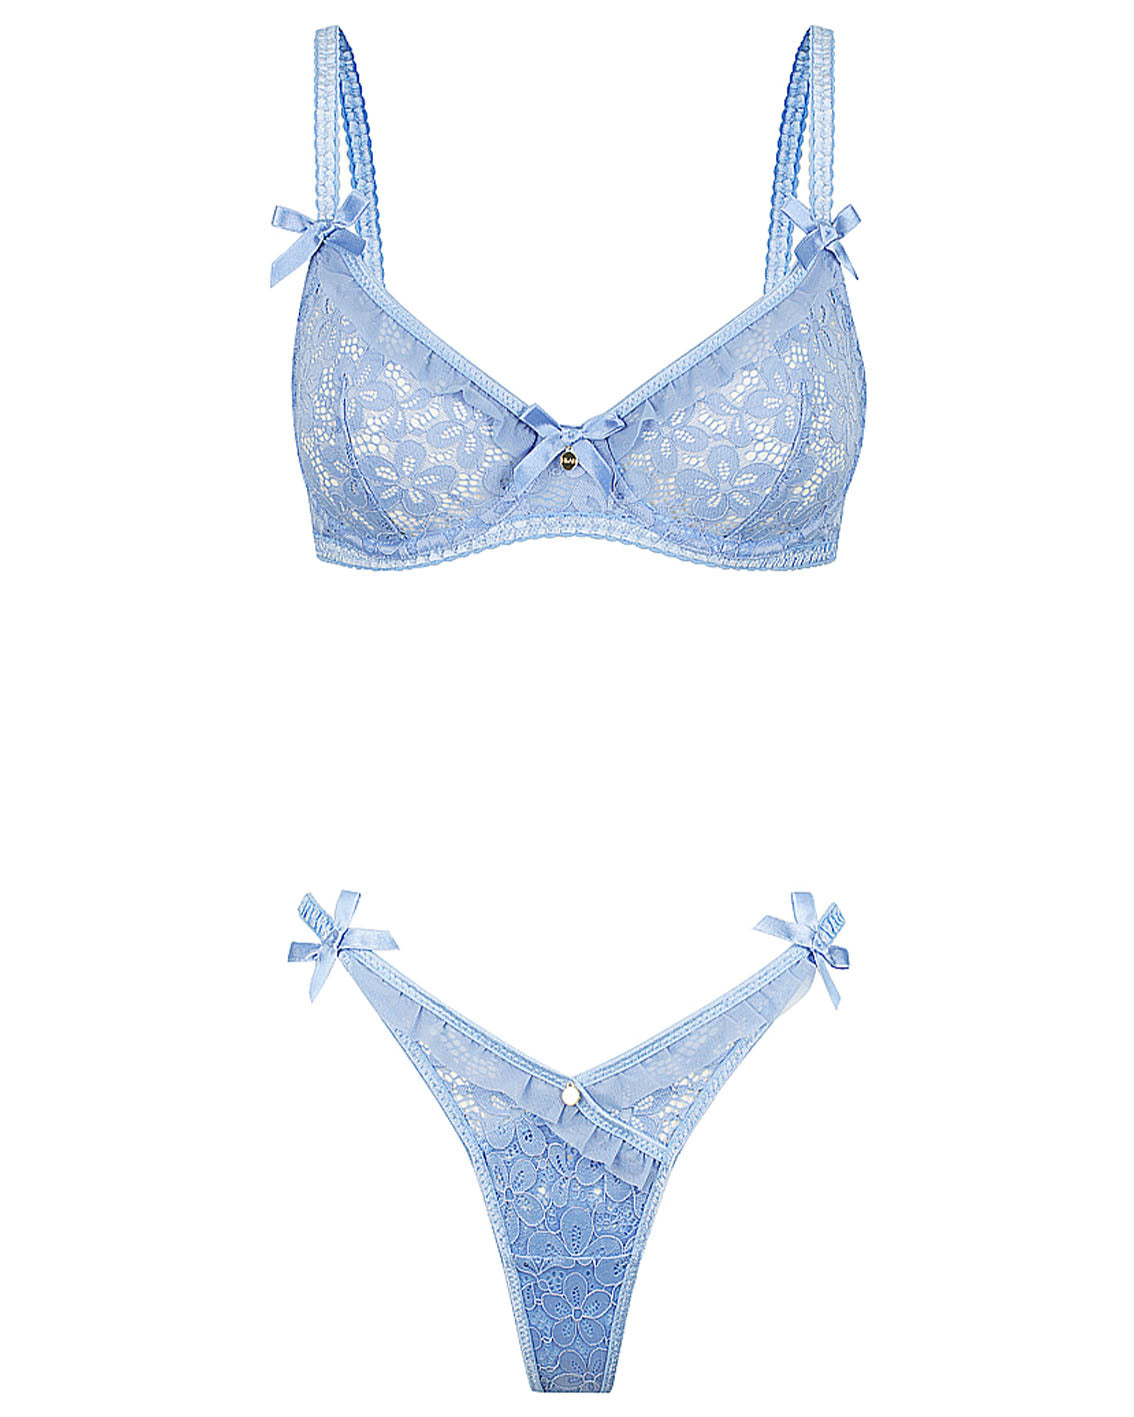 Maria Bra Blue - Forever and a day intimates